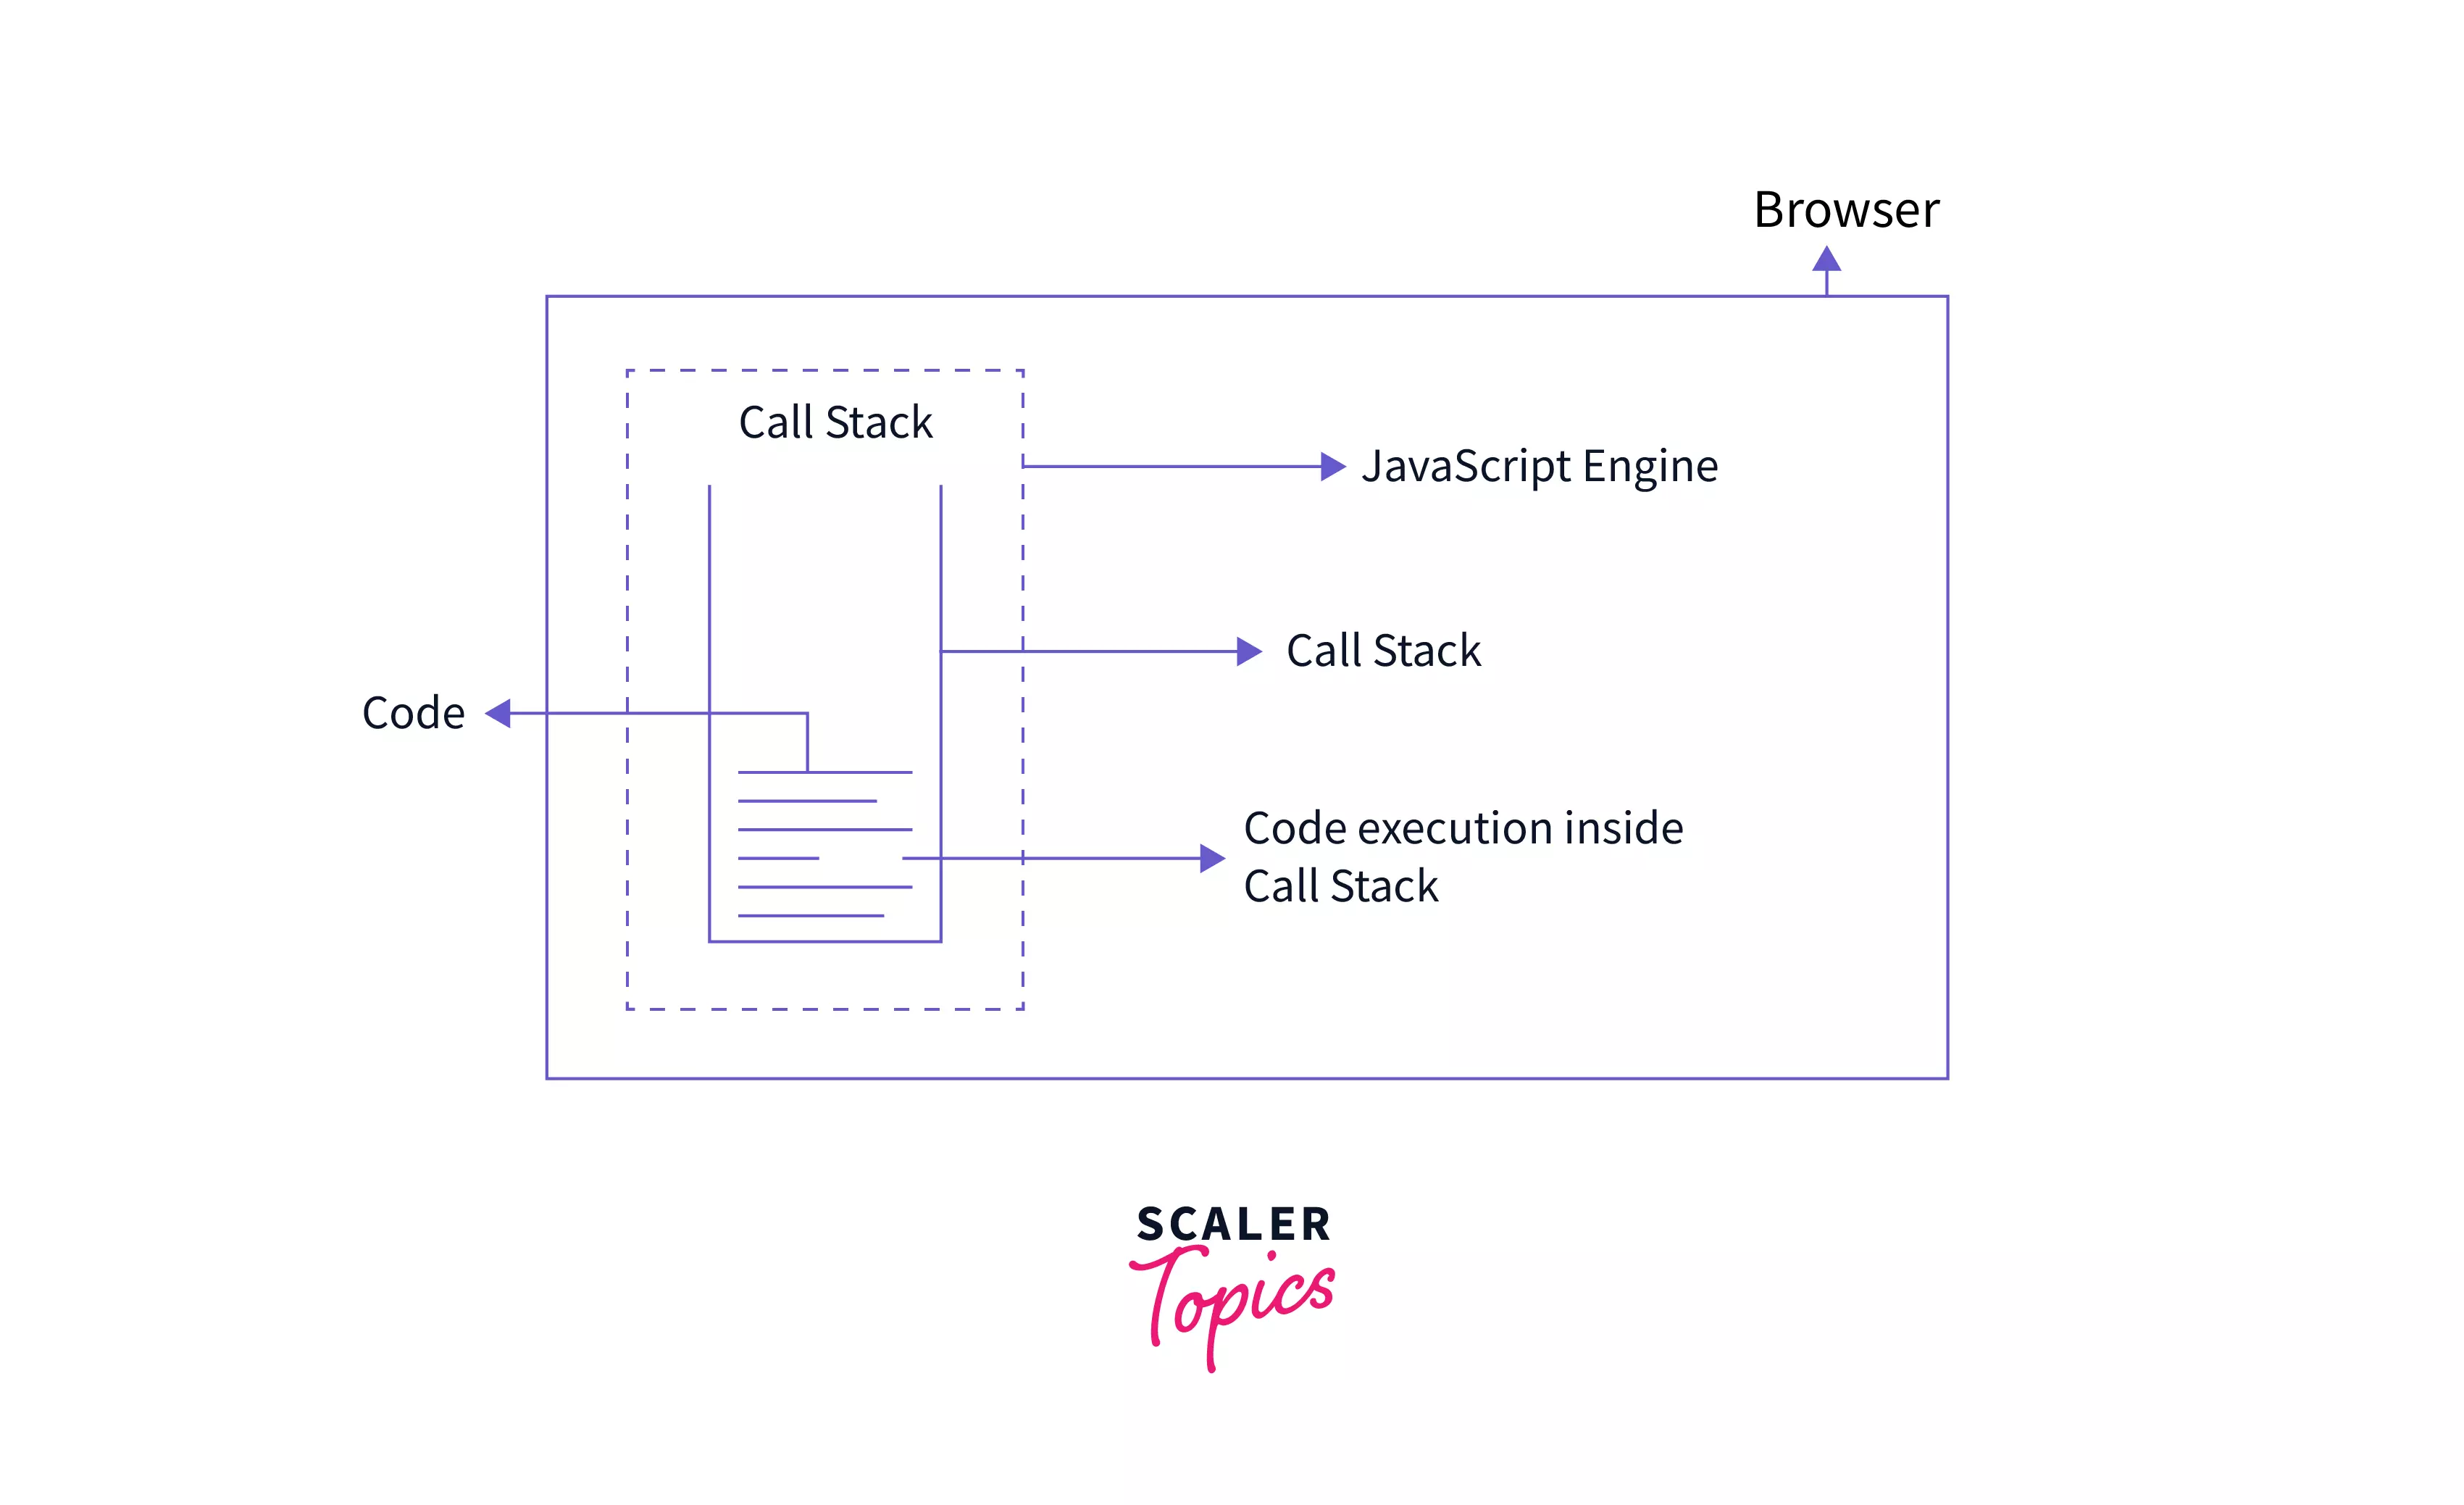 the browser and call stack